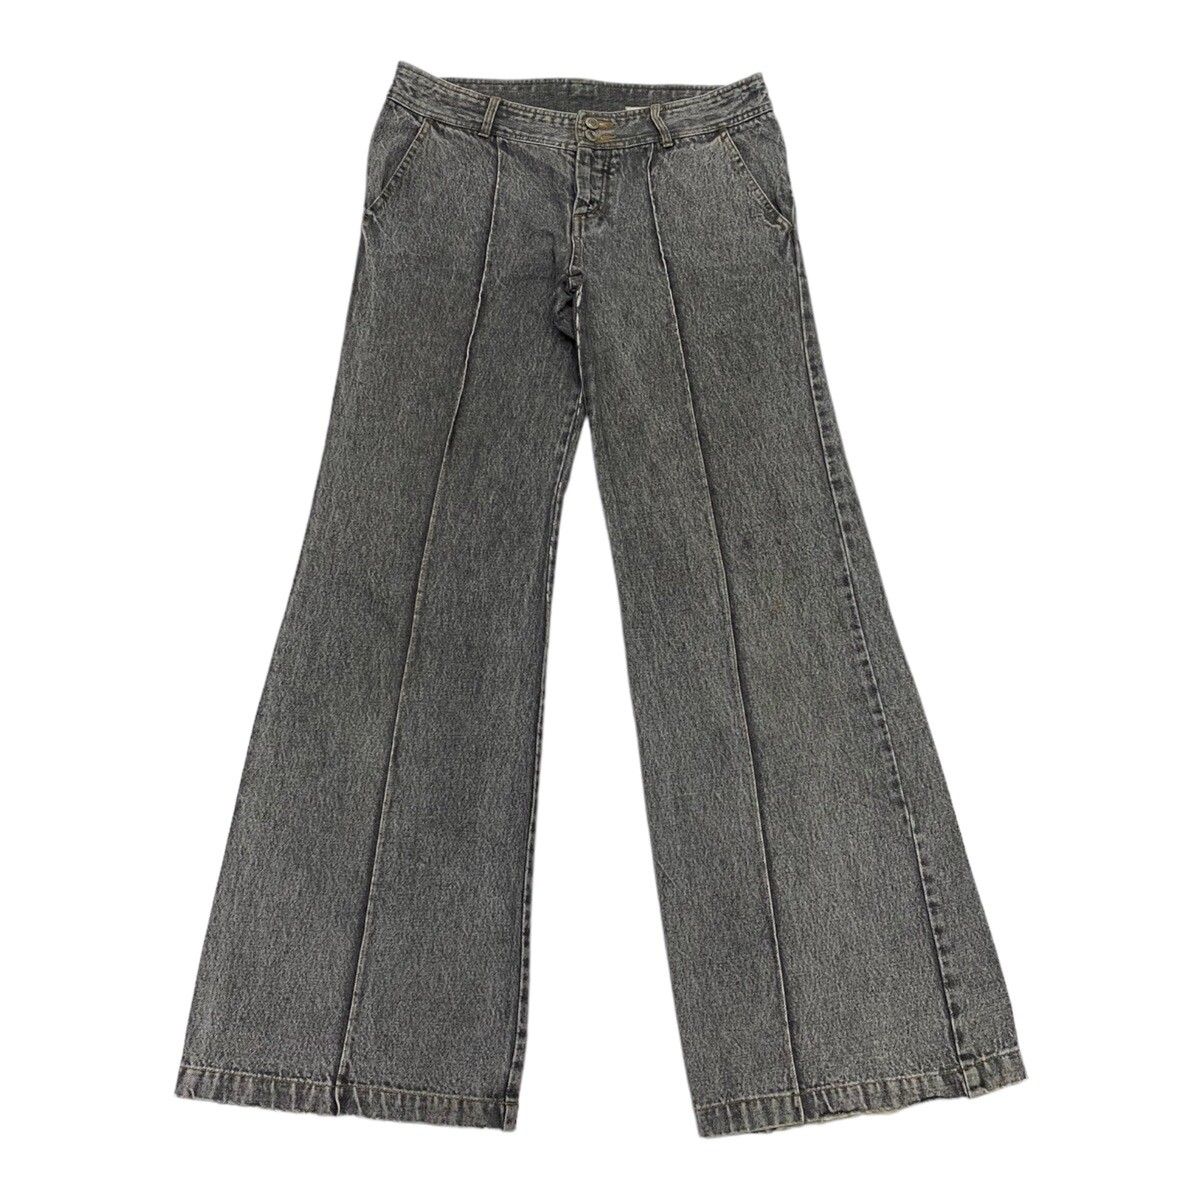 Pre-owned Avant Garde X Hysteric Glamour Japanese Avant Garde Style Denim Flare Distressed Bootcut In Grey